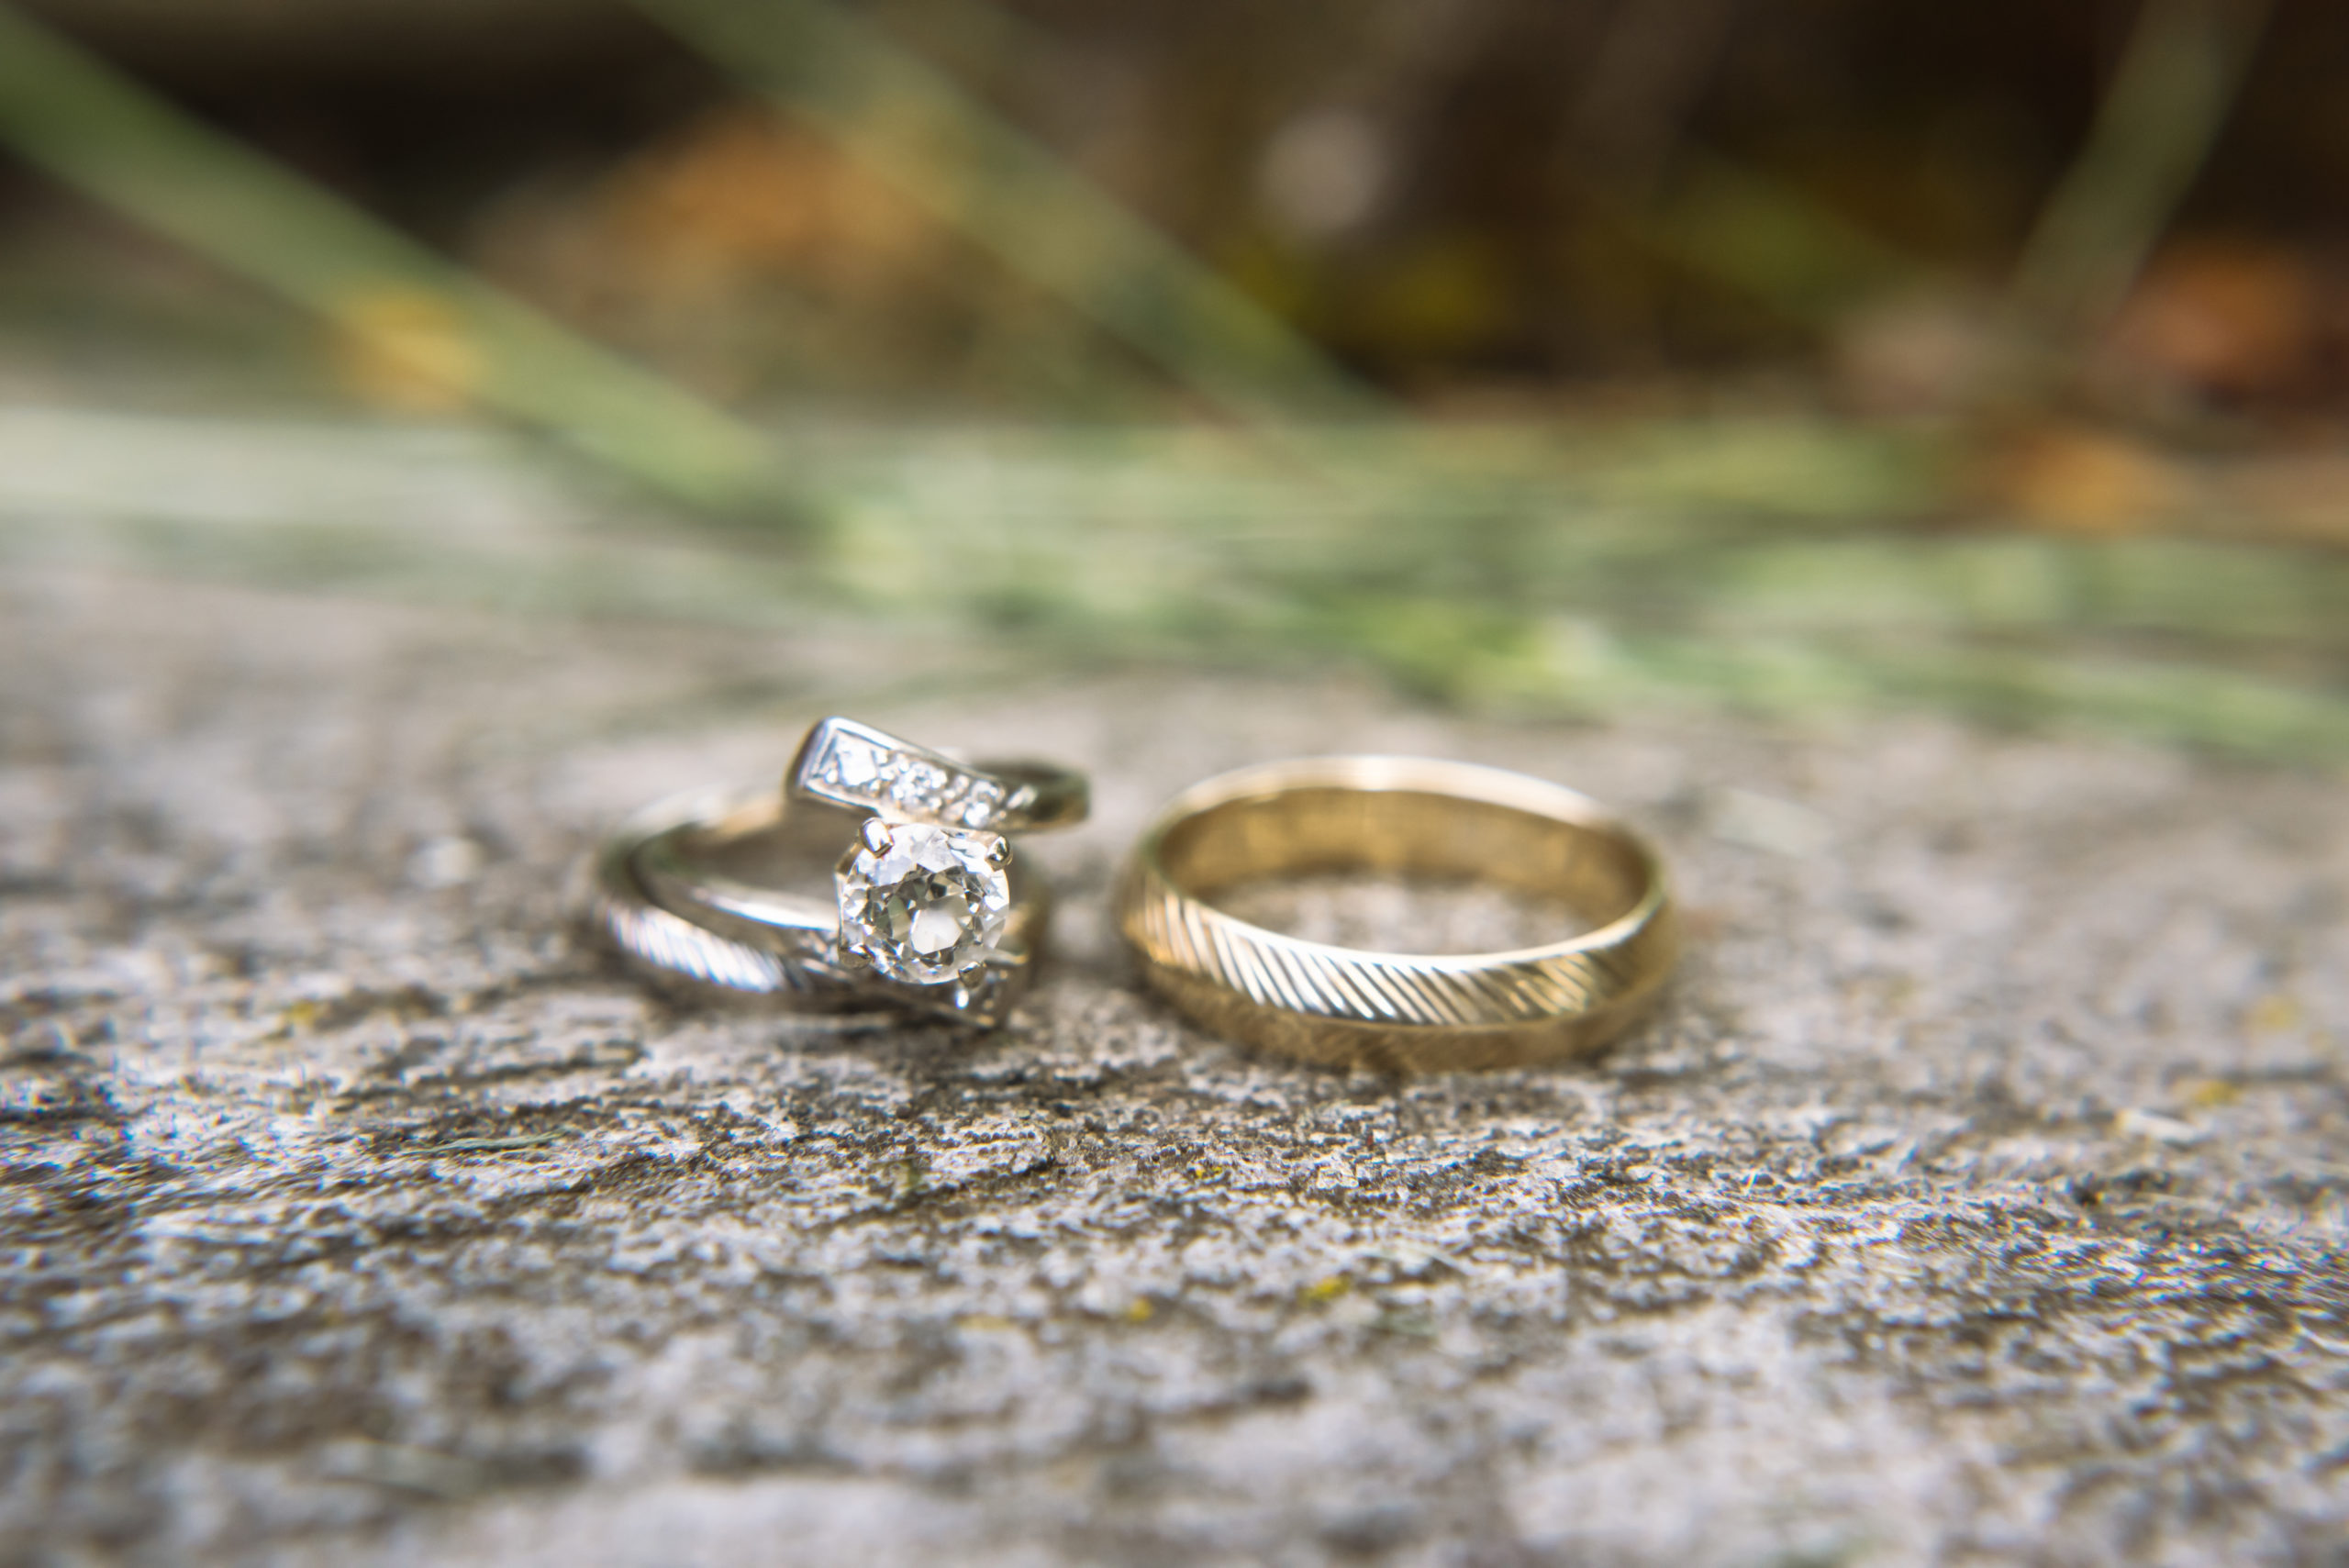 Detail of the couple's rings. Included is the silver engagement ring, the bride's silver wedding band, and the groom's gold wedding band. All rings are set on a stone surface with grass in the background.